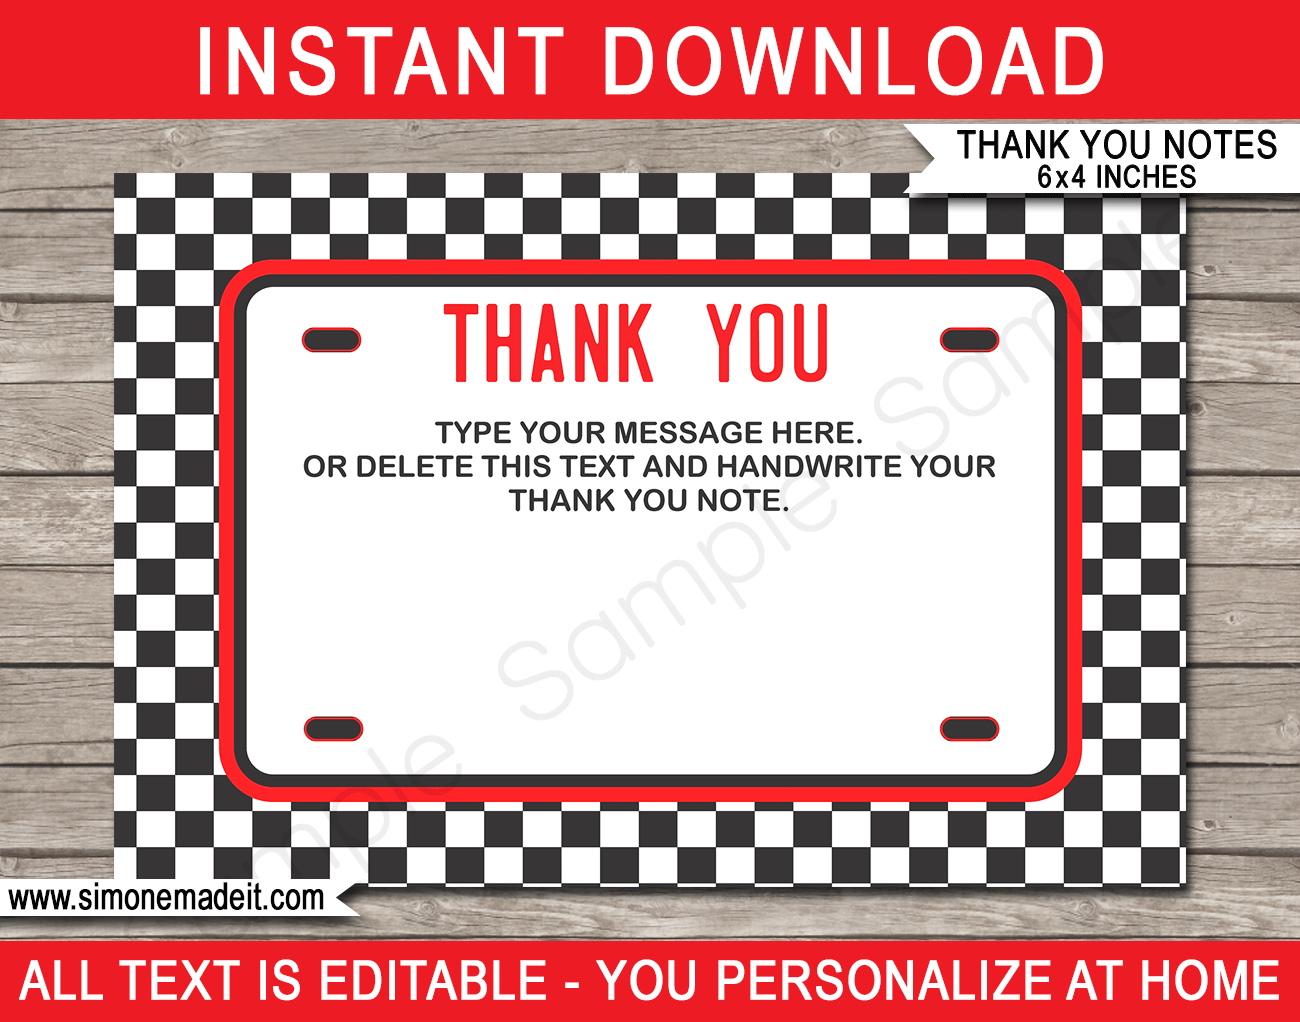 Printable Race Car Party Thank You Cards - Favor Tags - Racing Car Birthday Party theme - Editable Template - Instant Download via simonemadeit.com